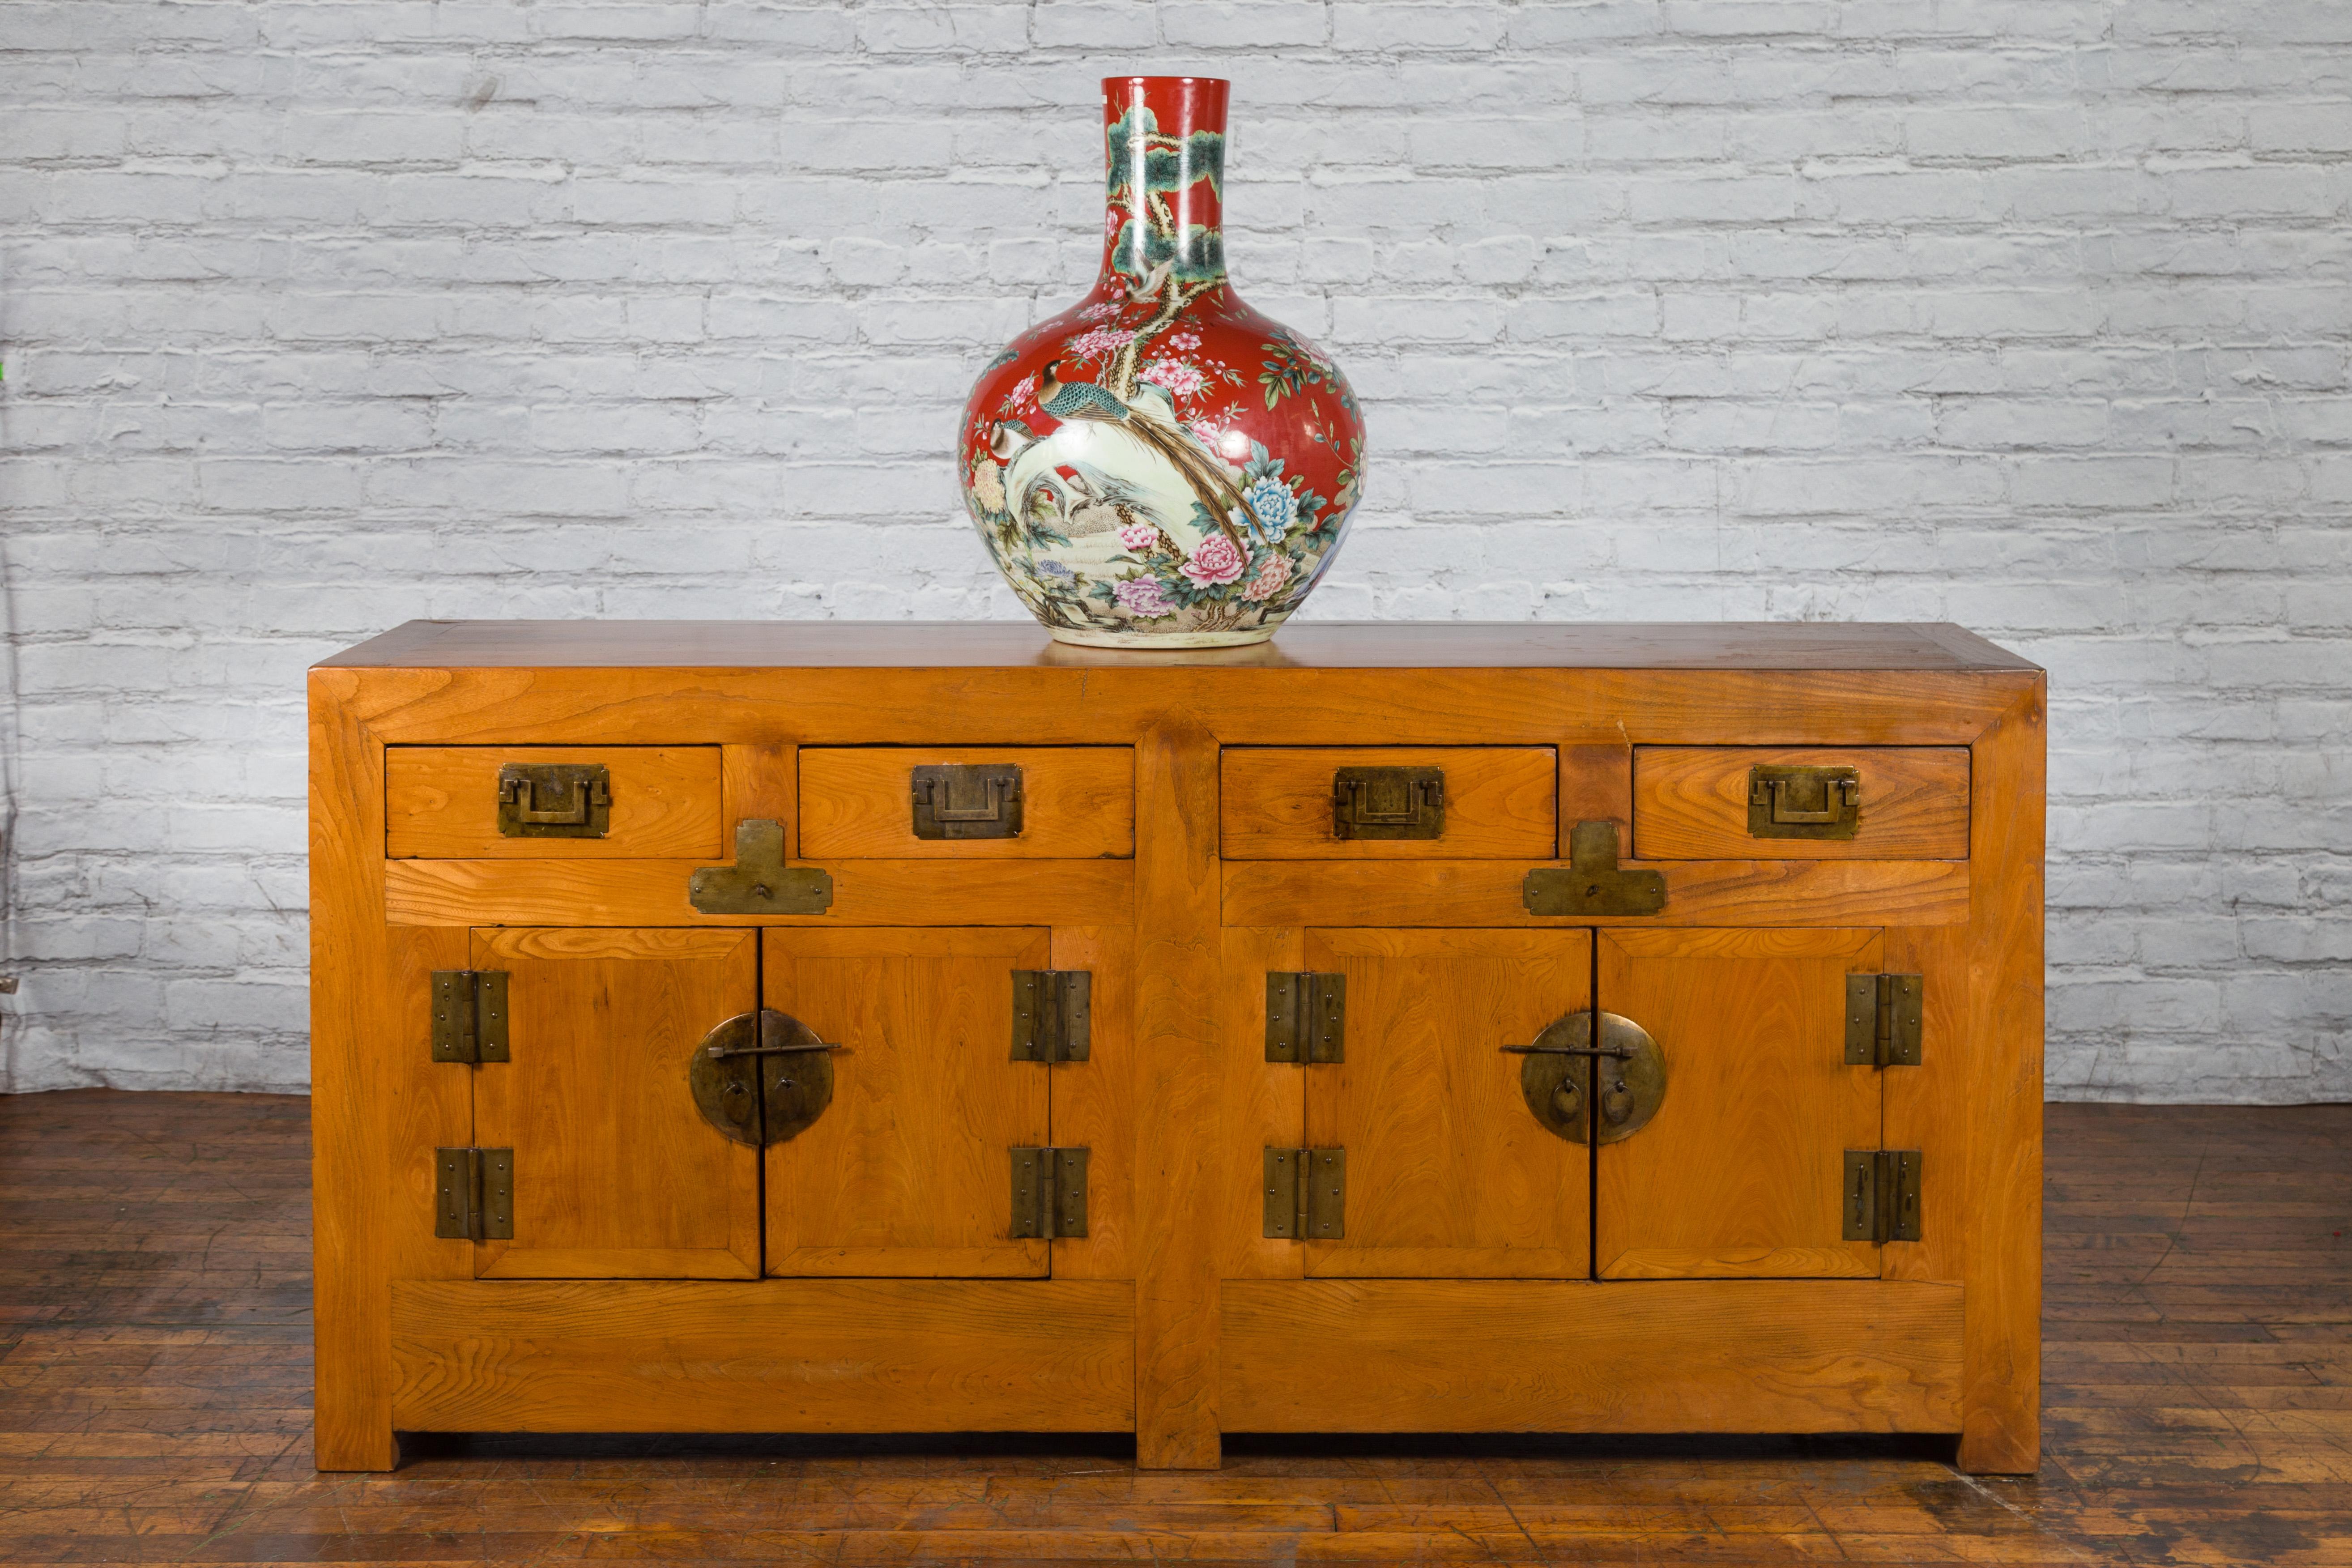 A Chinese Qing Dynasty period natural elmwood sideboard from the 19th century, with four drawers and four doors. Created in China during the Qing Dynasty, this elm sideboard features a rectangular top sitting above four drawers over four doors.